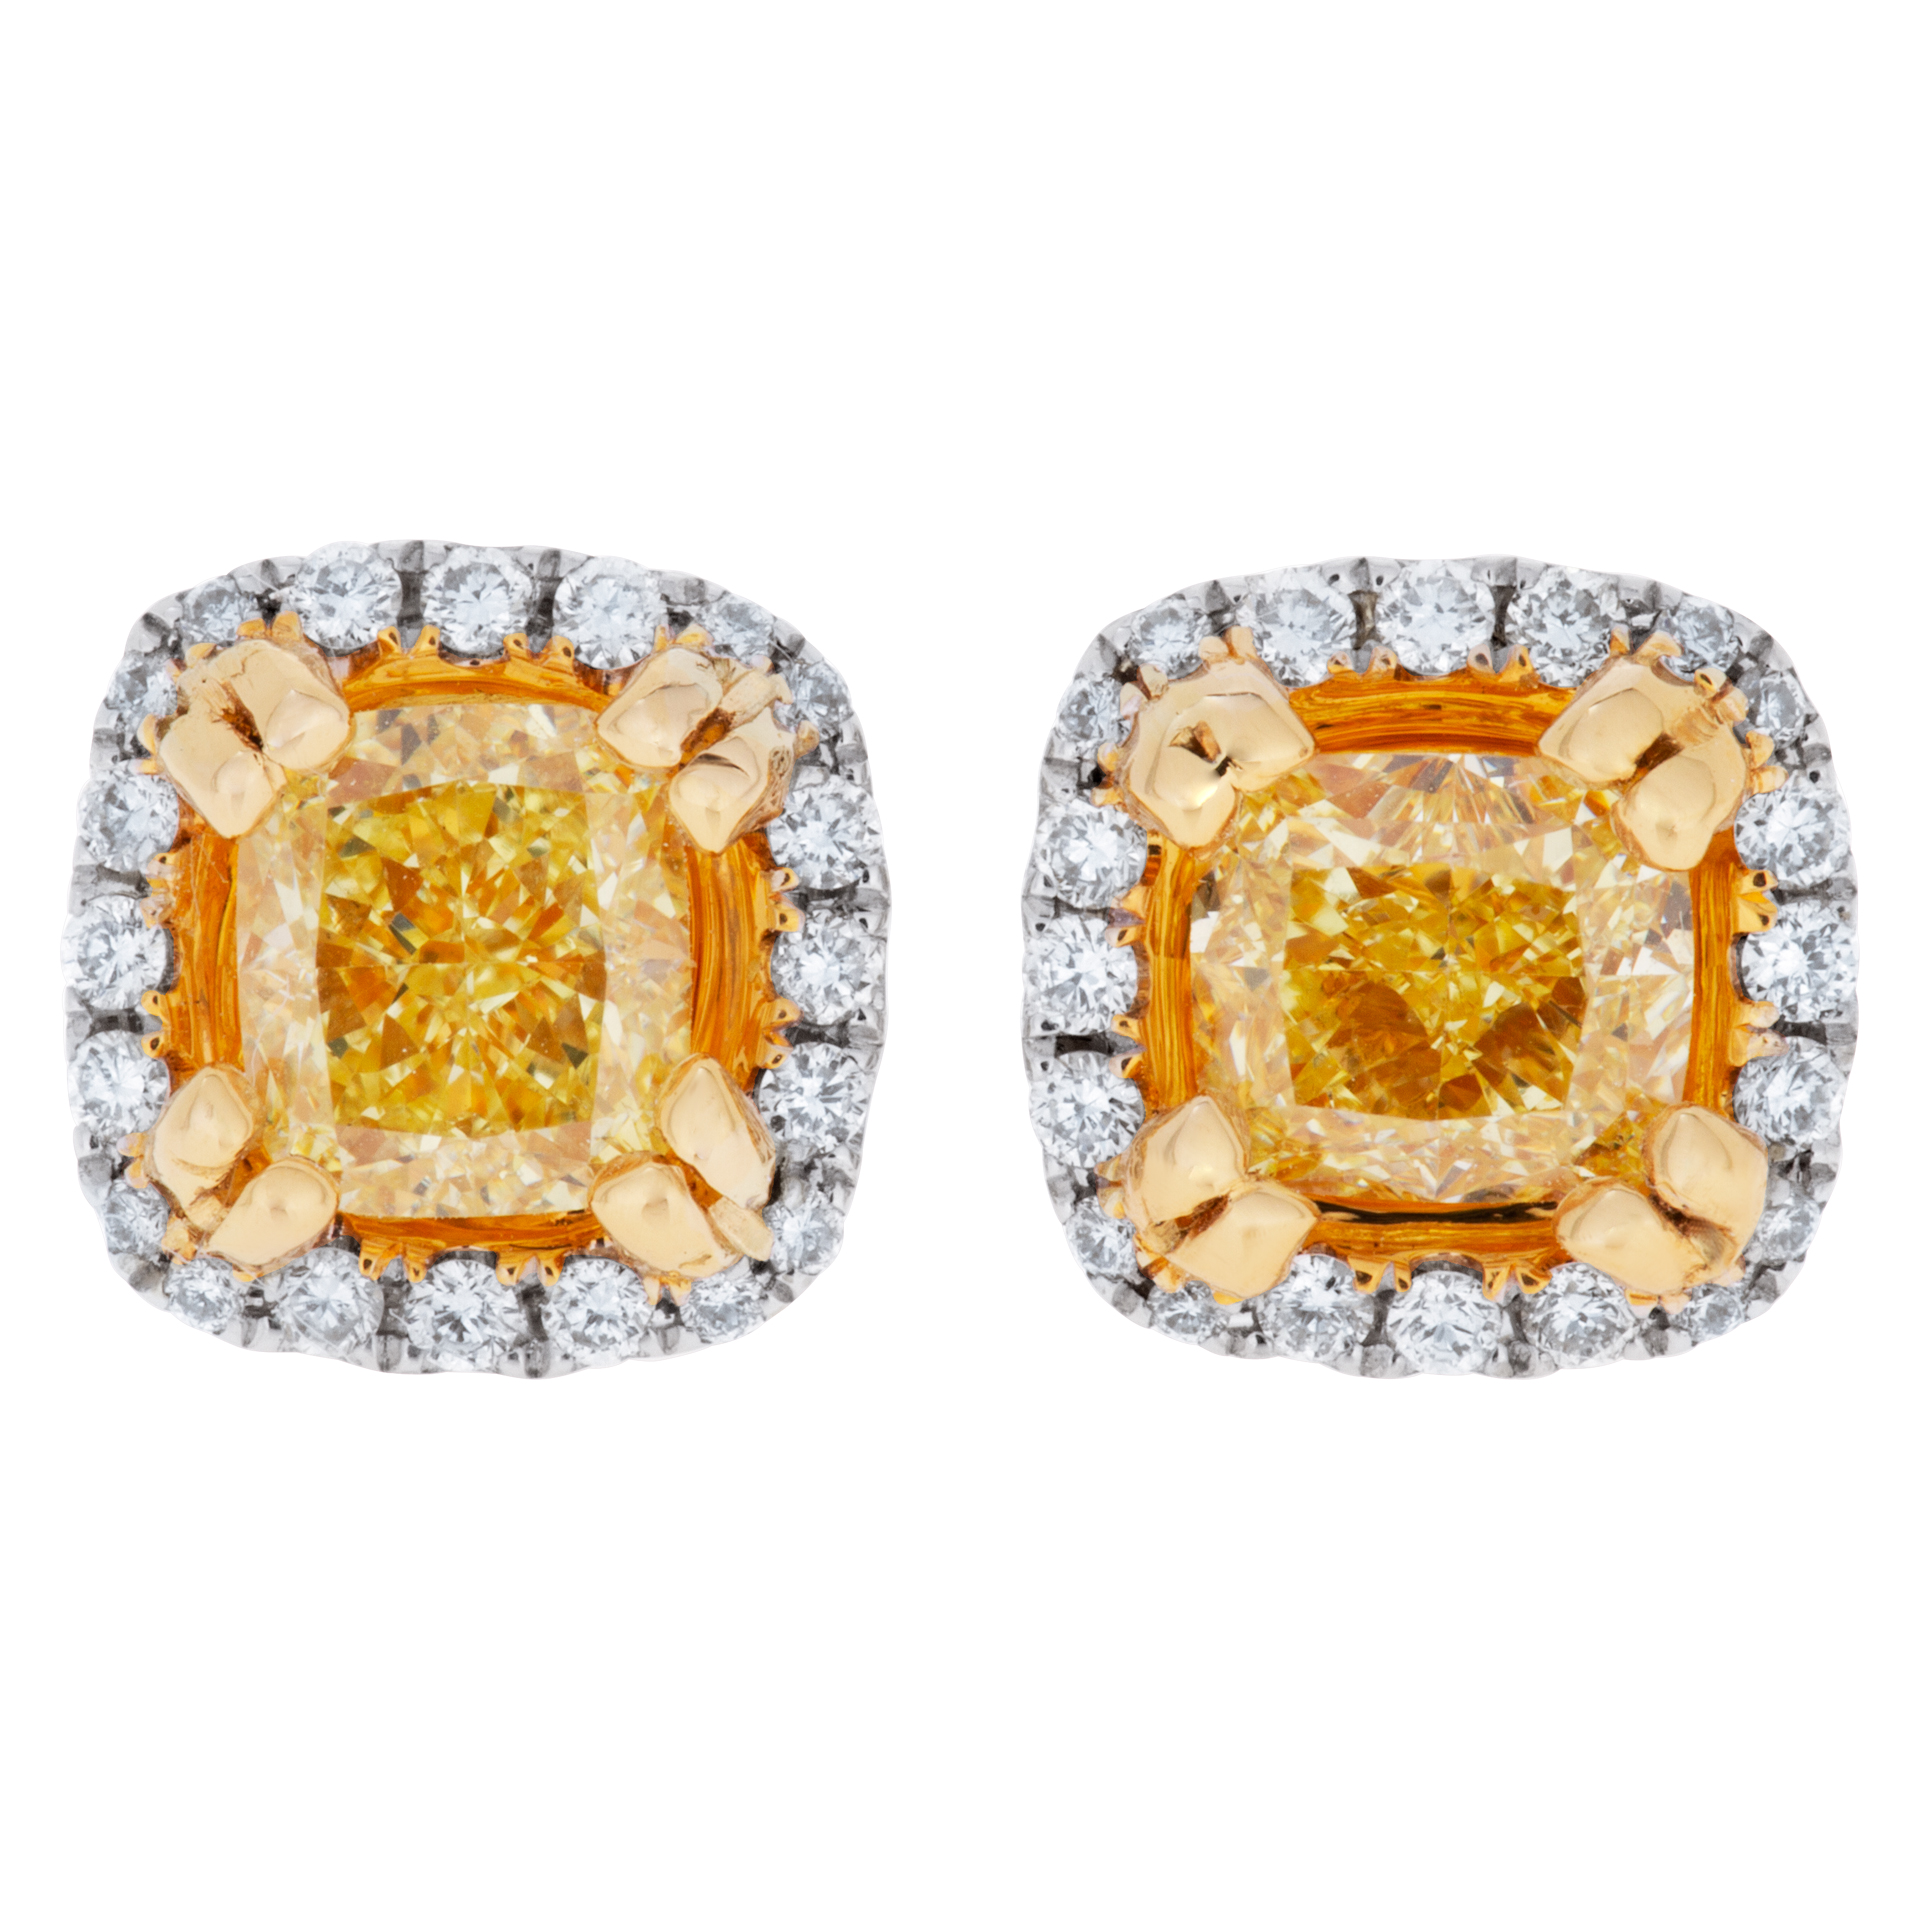 Yellow diamond stud earrings in 18k white and yellow gold